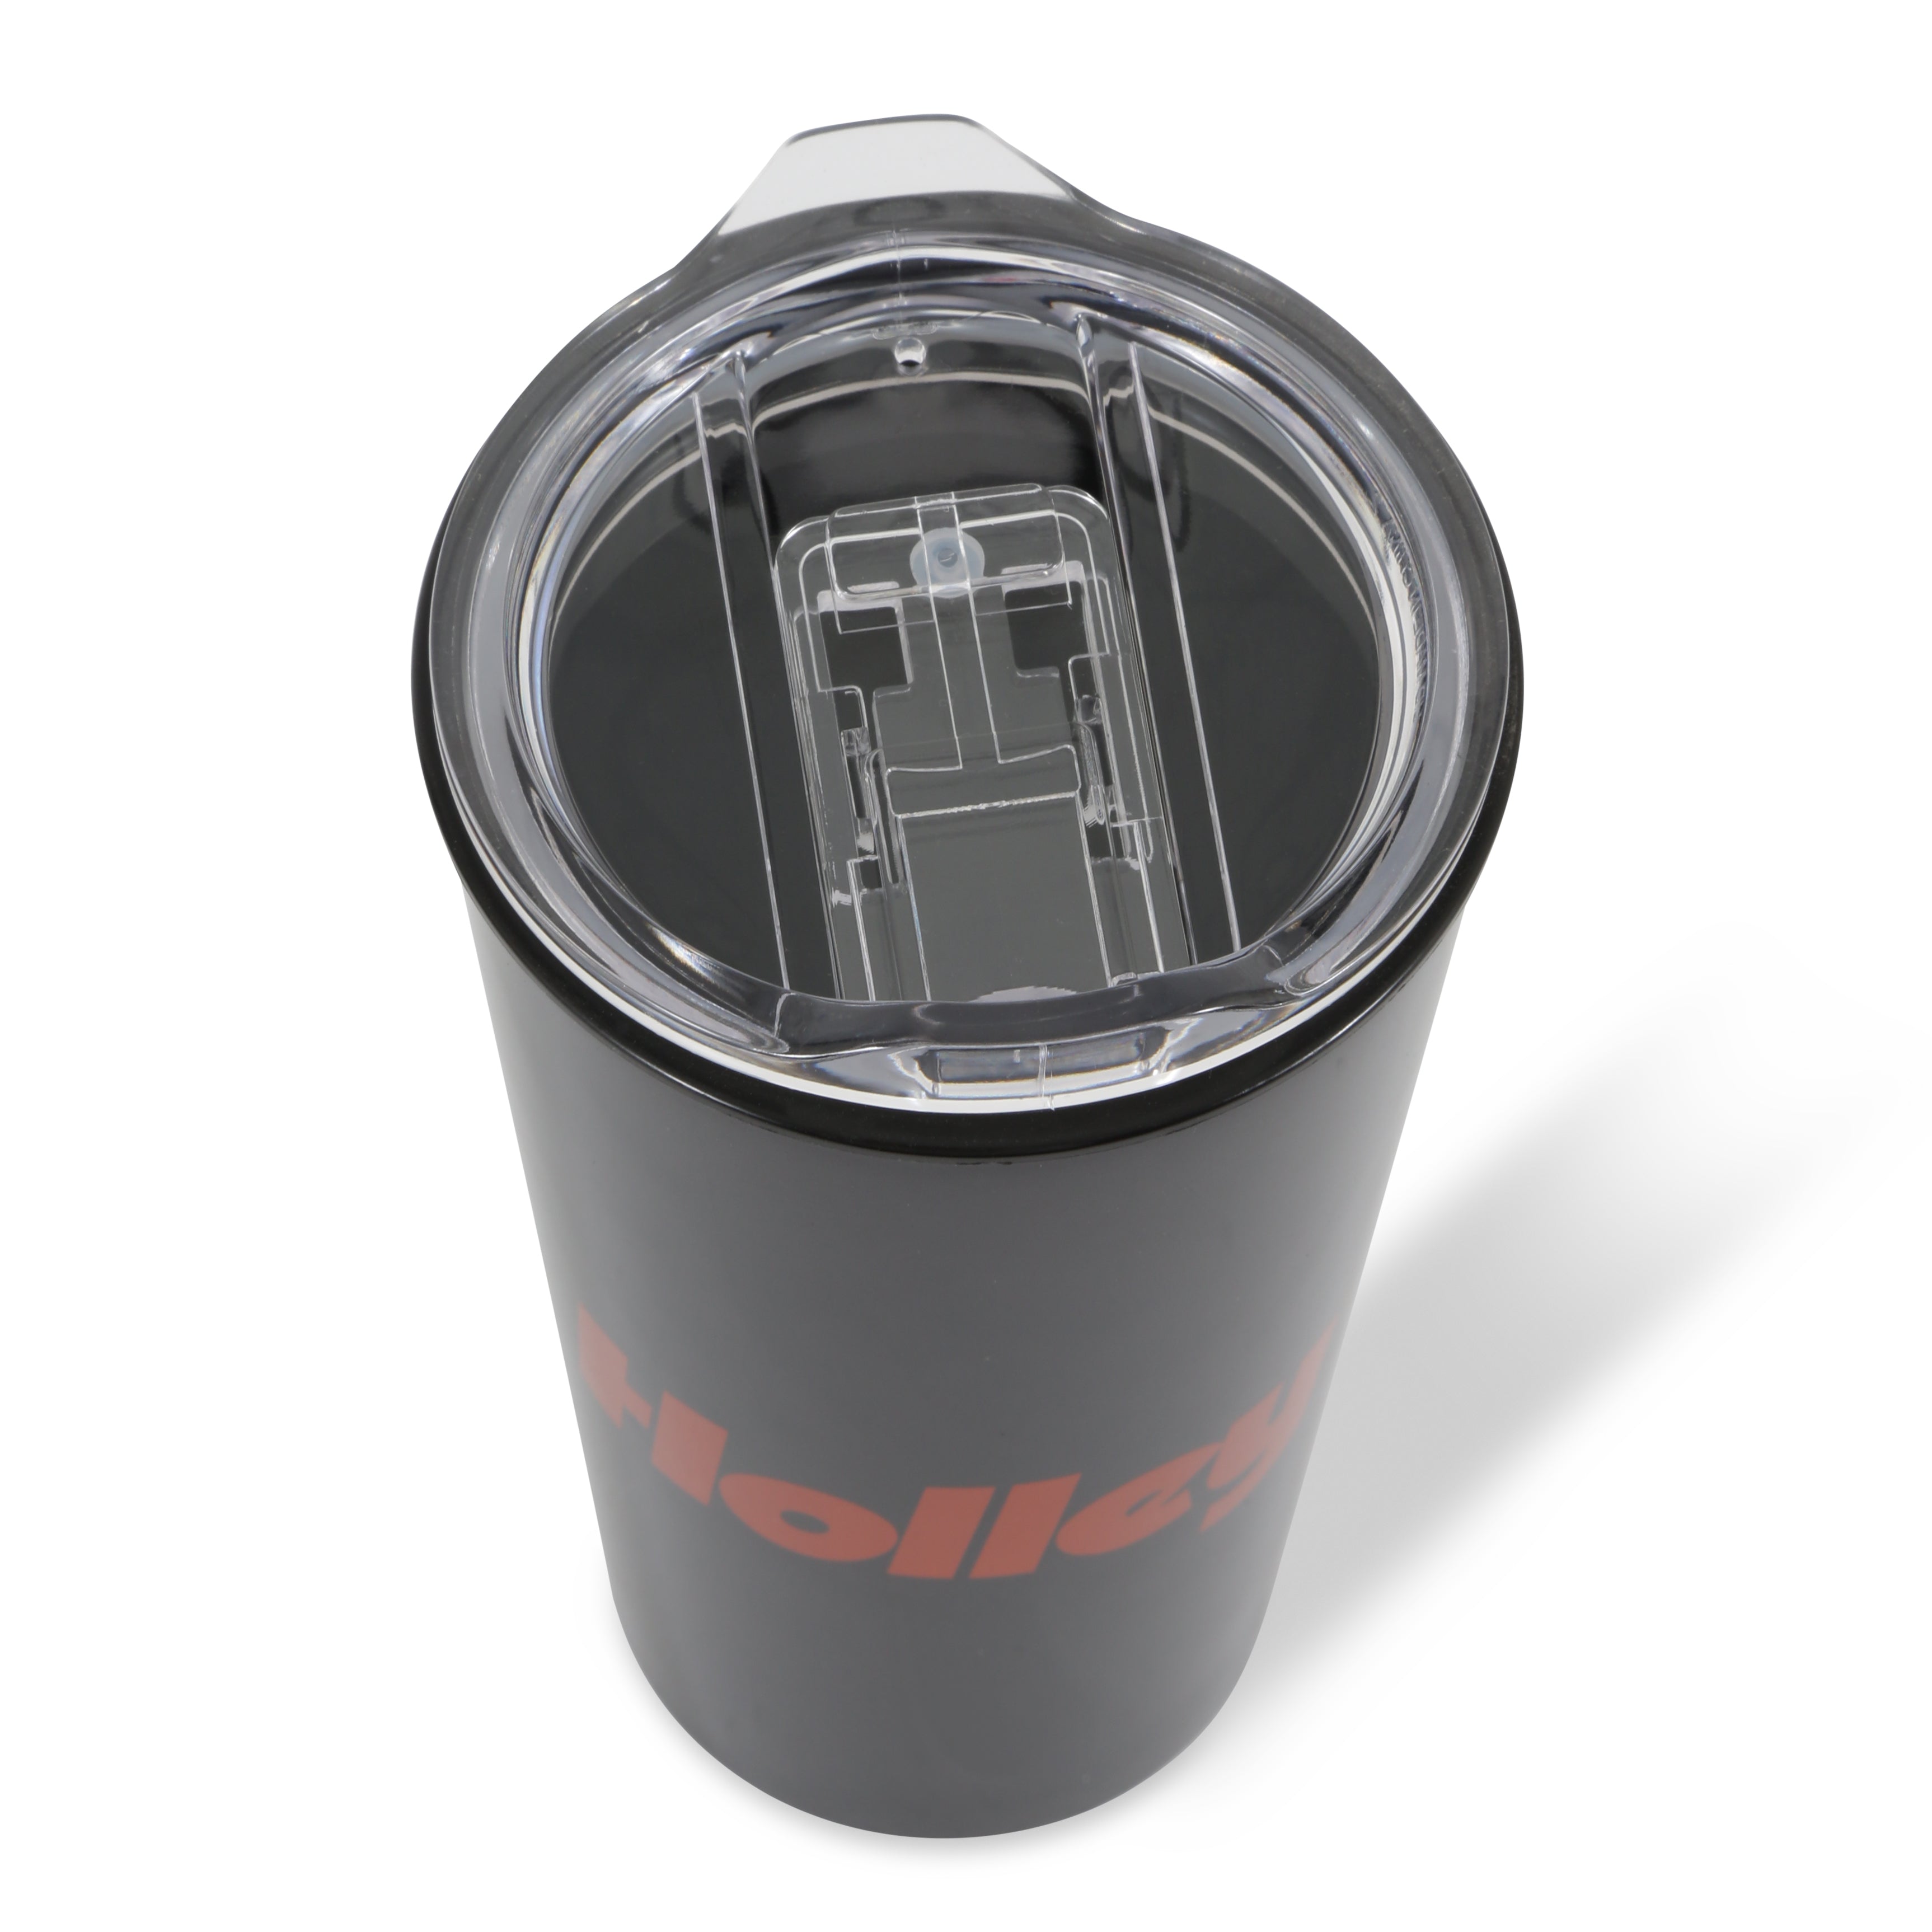 Holley Cup Coffee Tumbler 18-oz 36-587